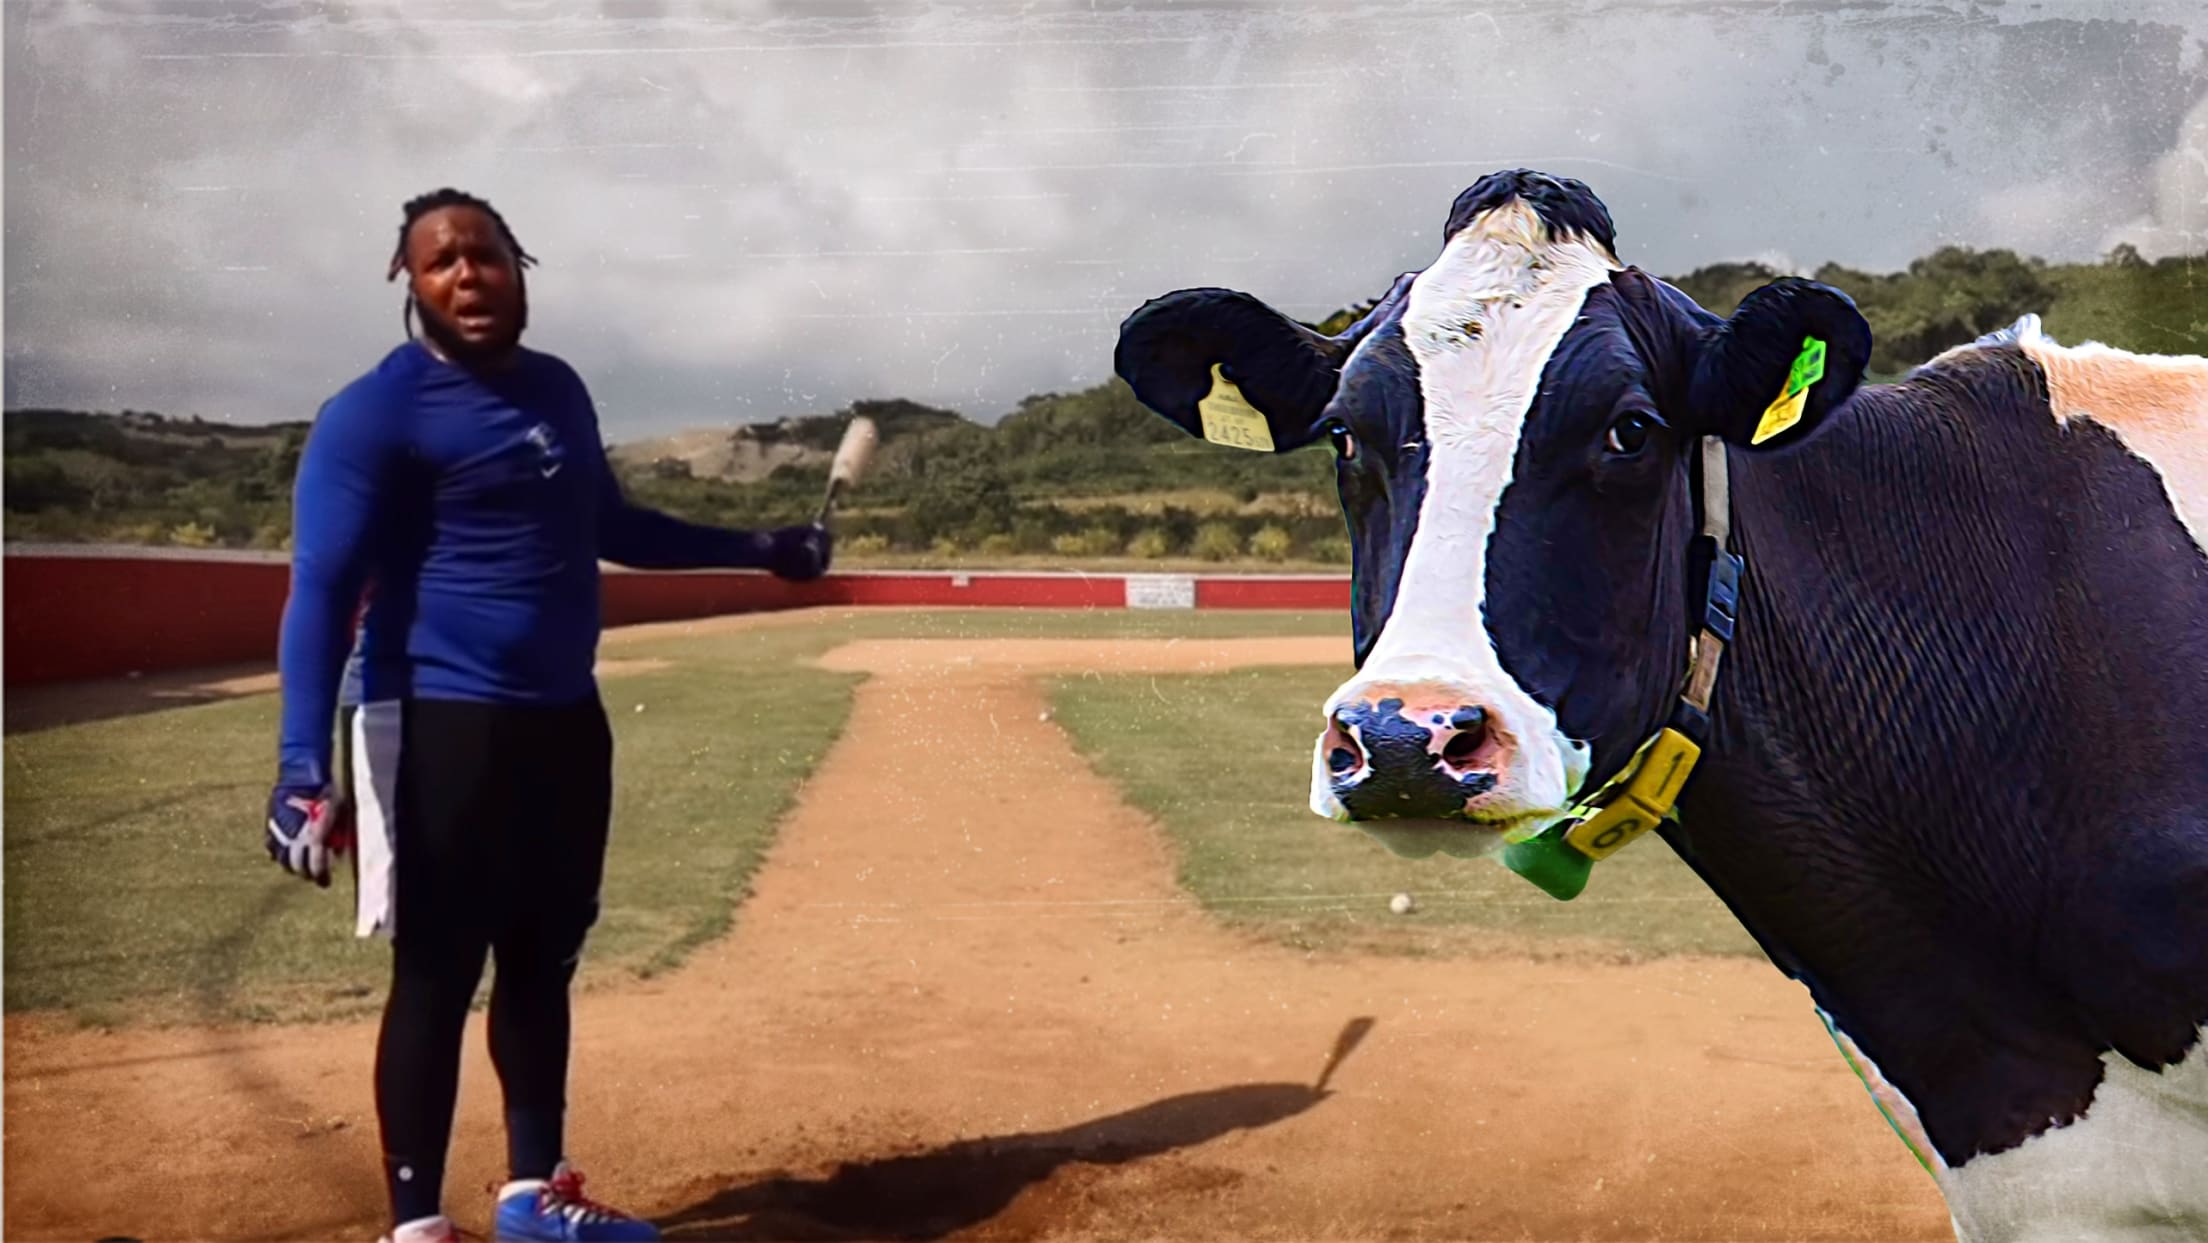 A video screengrab of Vladimir Guerrero Jr. holding a bat on a ballfield with an image of a cow added on the right side